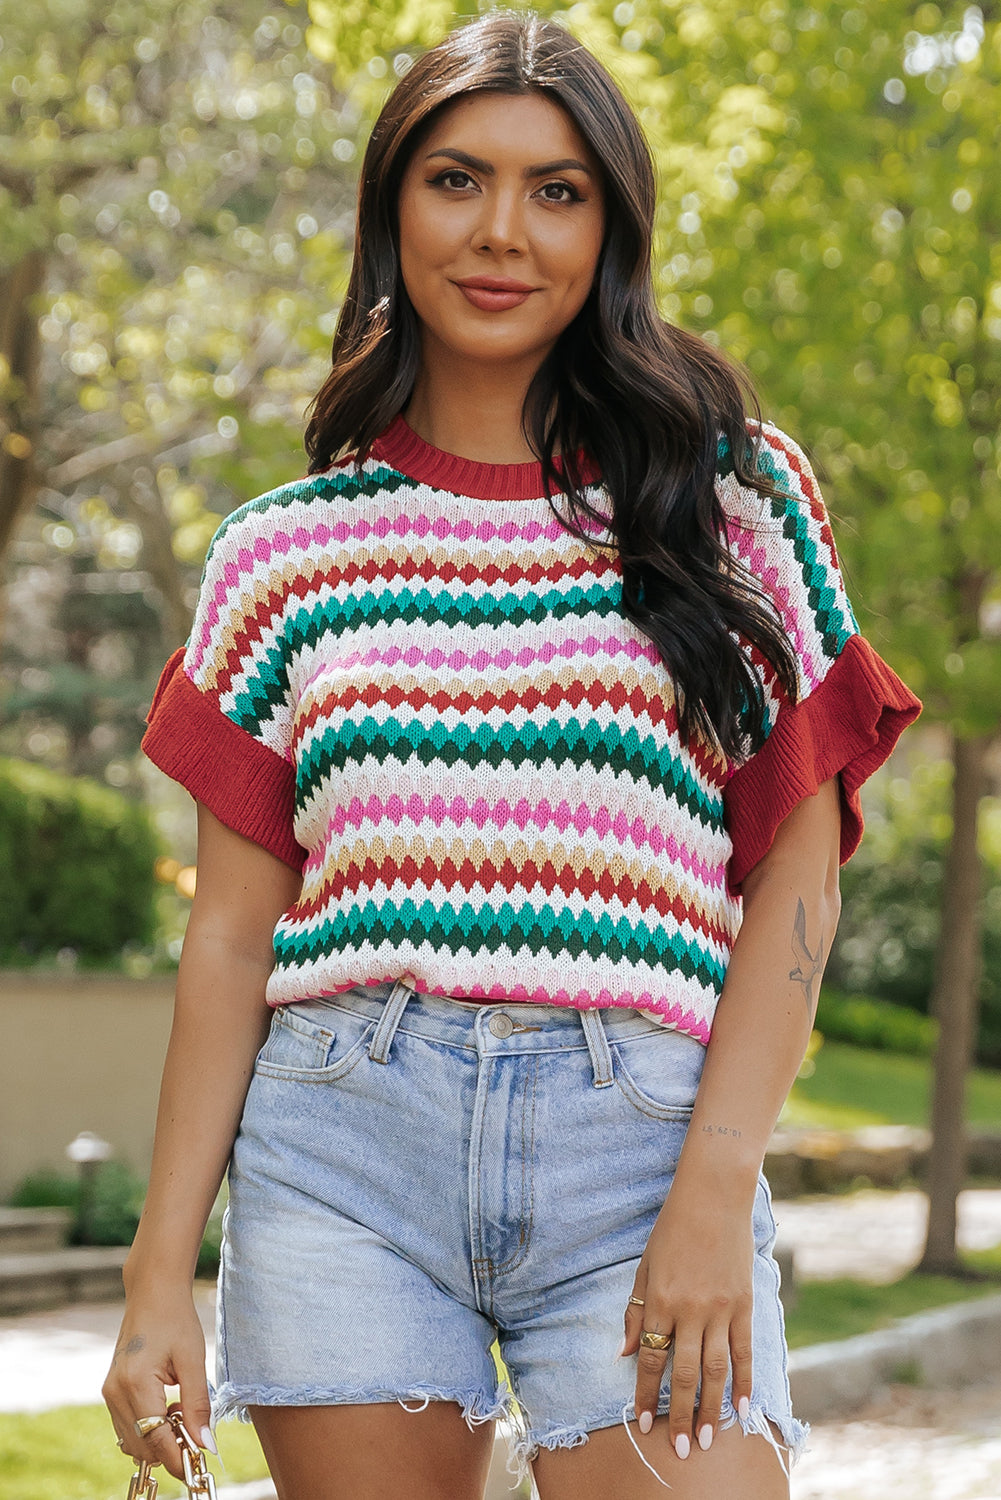 Fiery Red Trimmed Ruffle Sleeve Colorful Textured Sweater